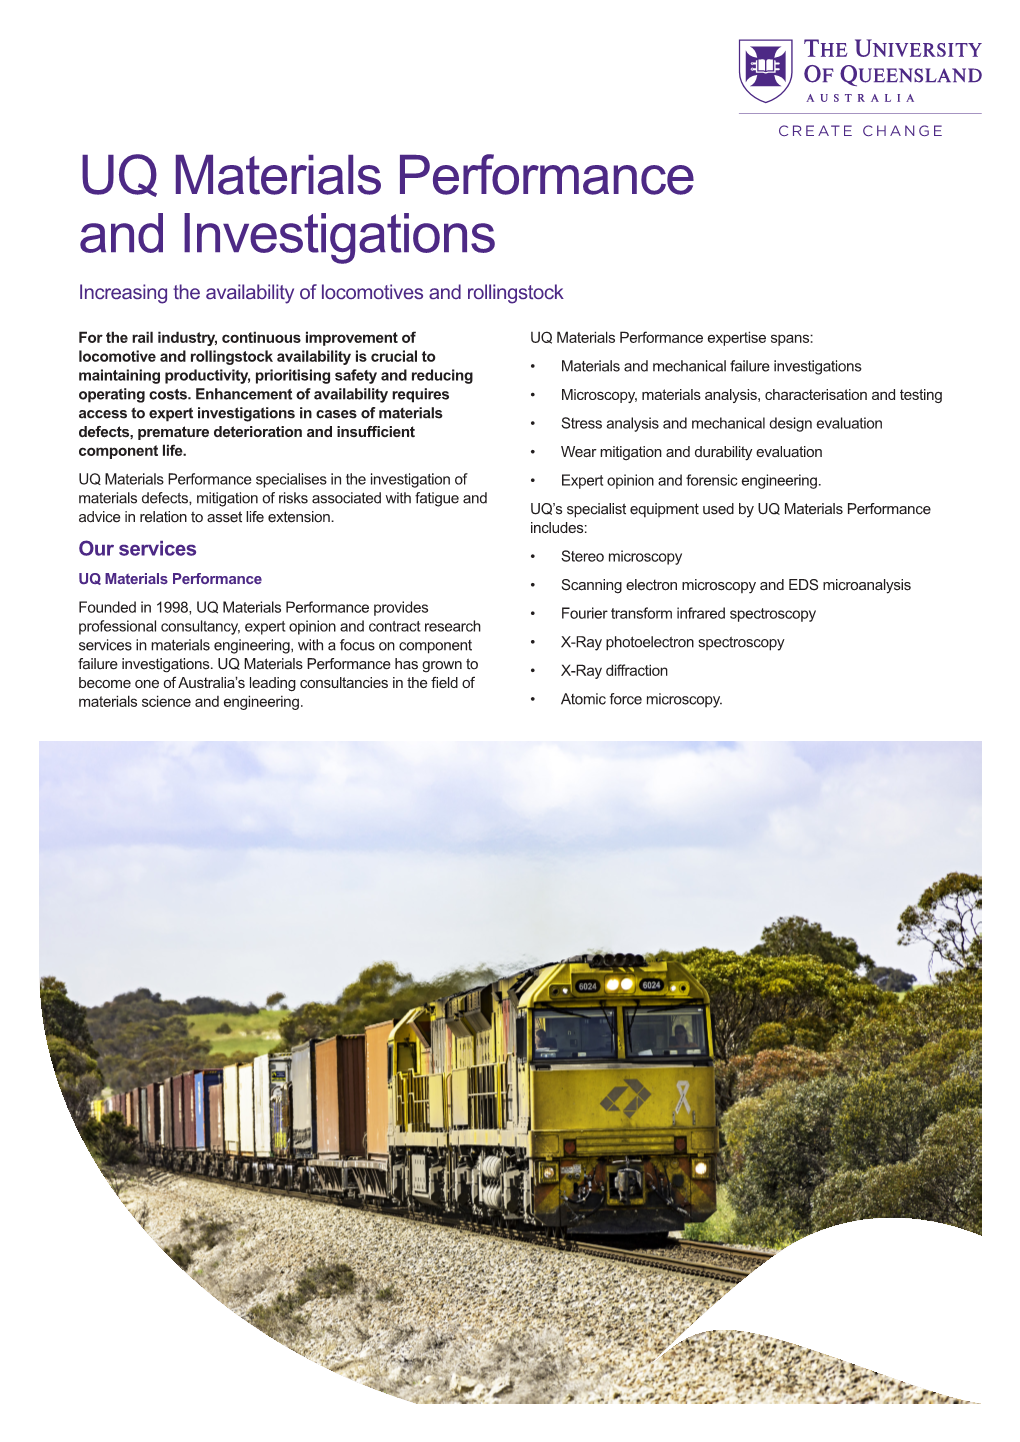 UQ Materials Performance and Investigations Increasing the Availability of Locomotives and Rollingstock